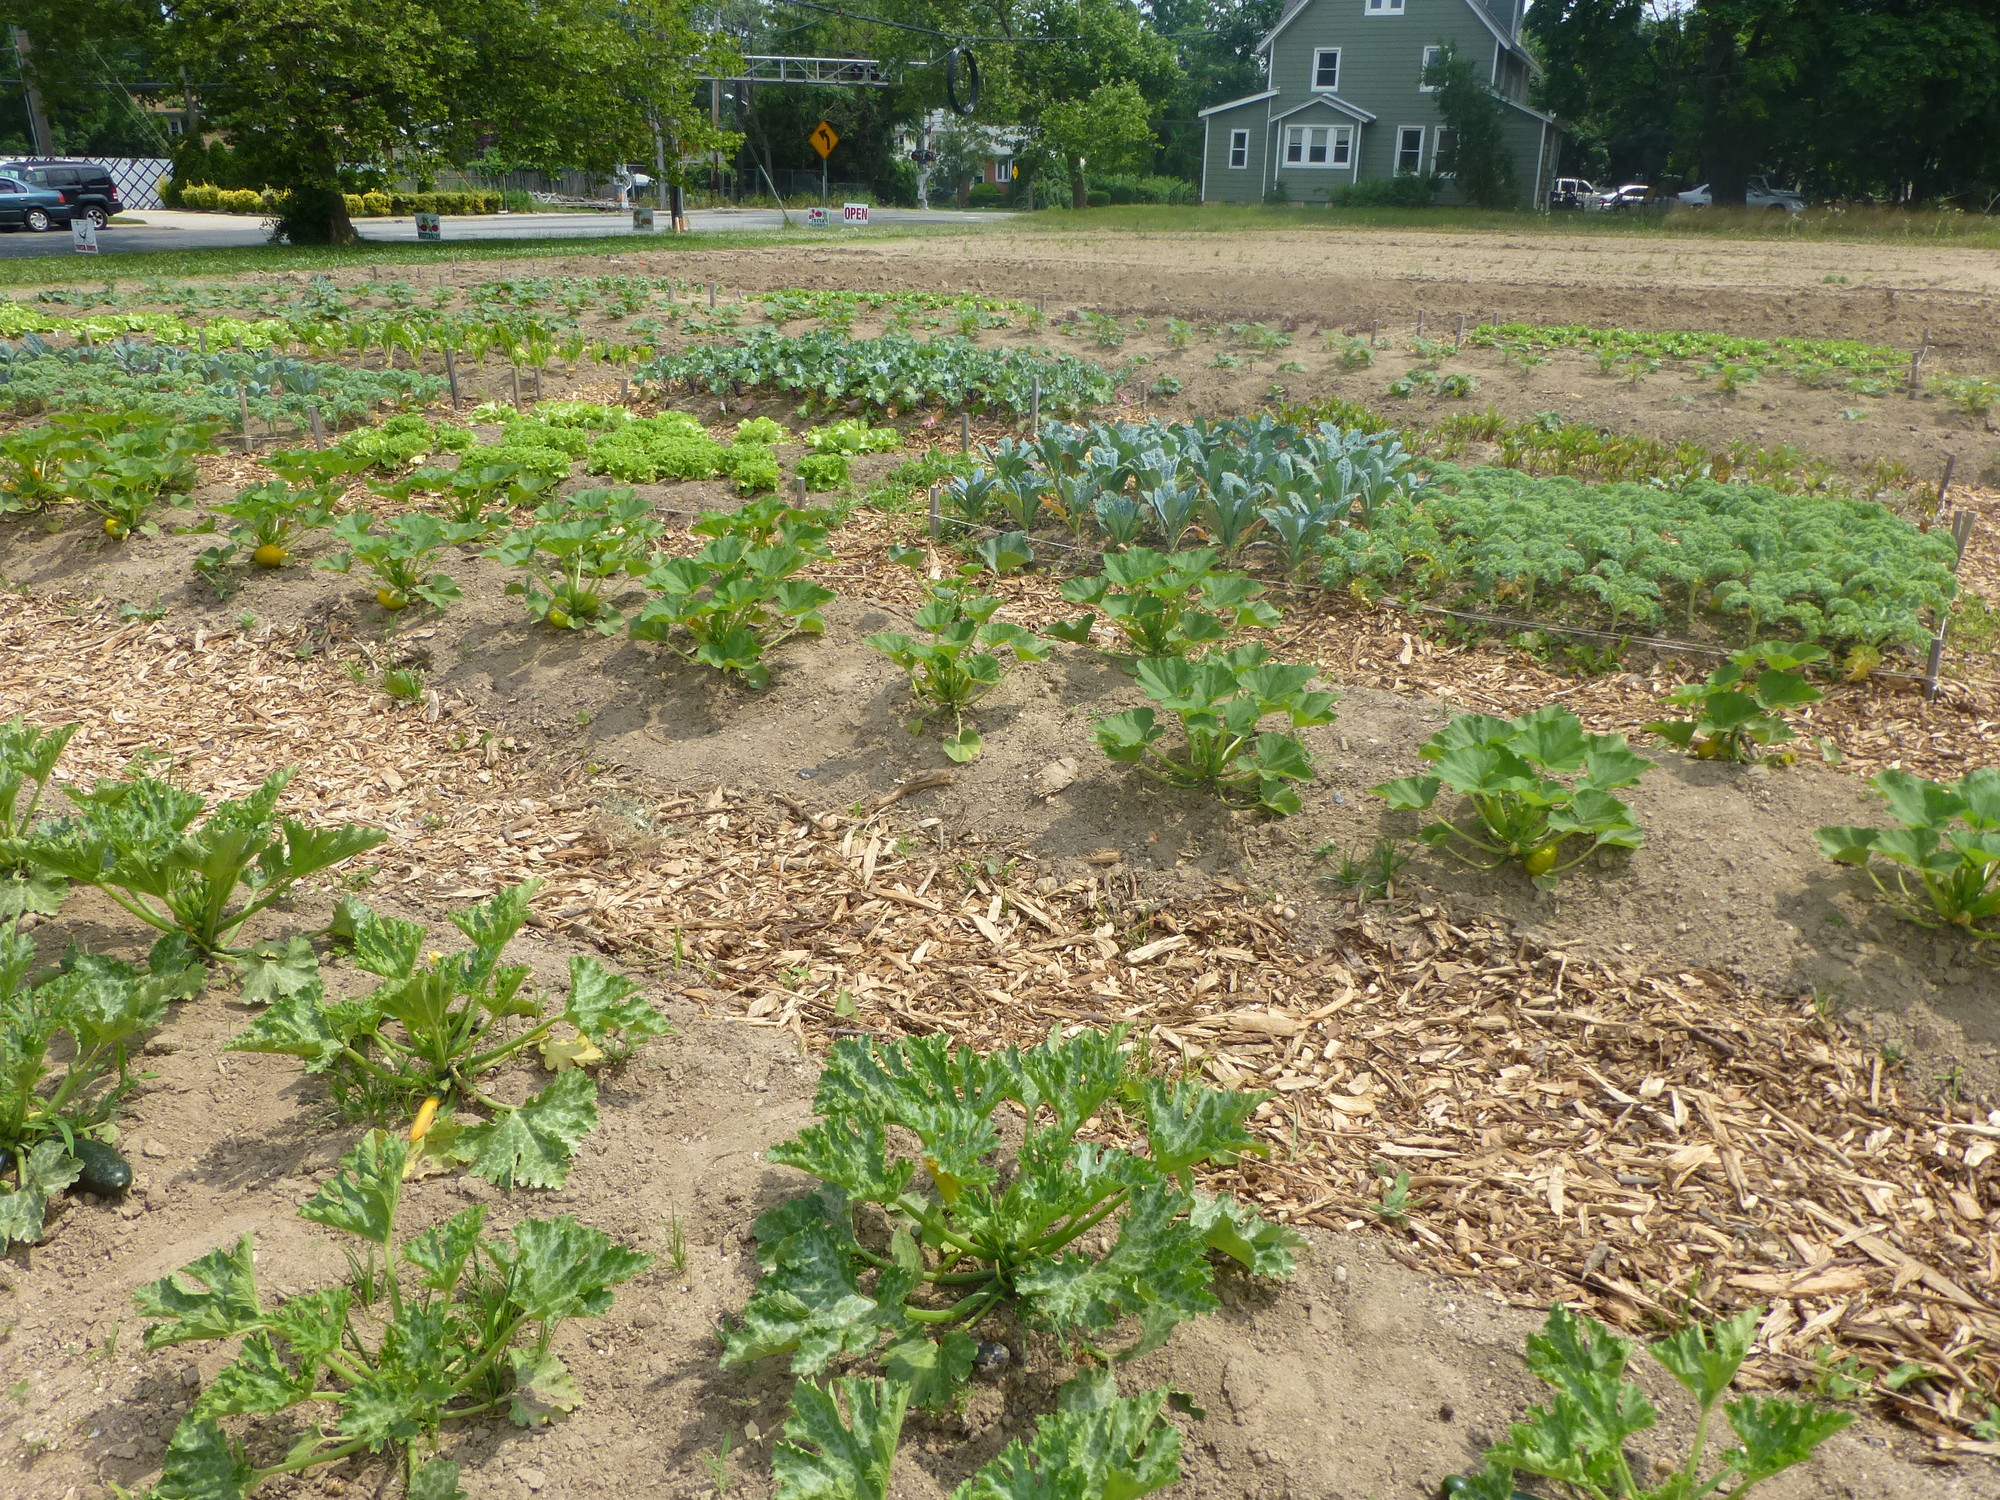 The fields sprouted a variety of summer vegetables, including kale, eggplant, potatoes, squash, cabbage, carrots, broccoli, cucumbers and sweet corn.